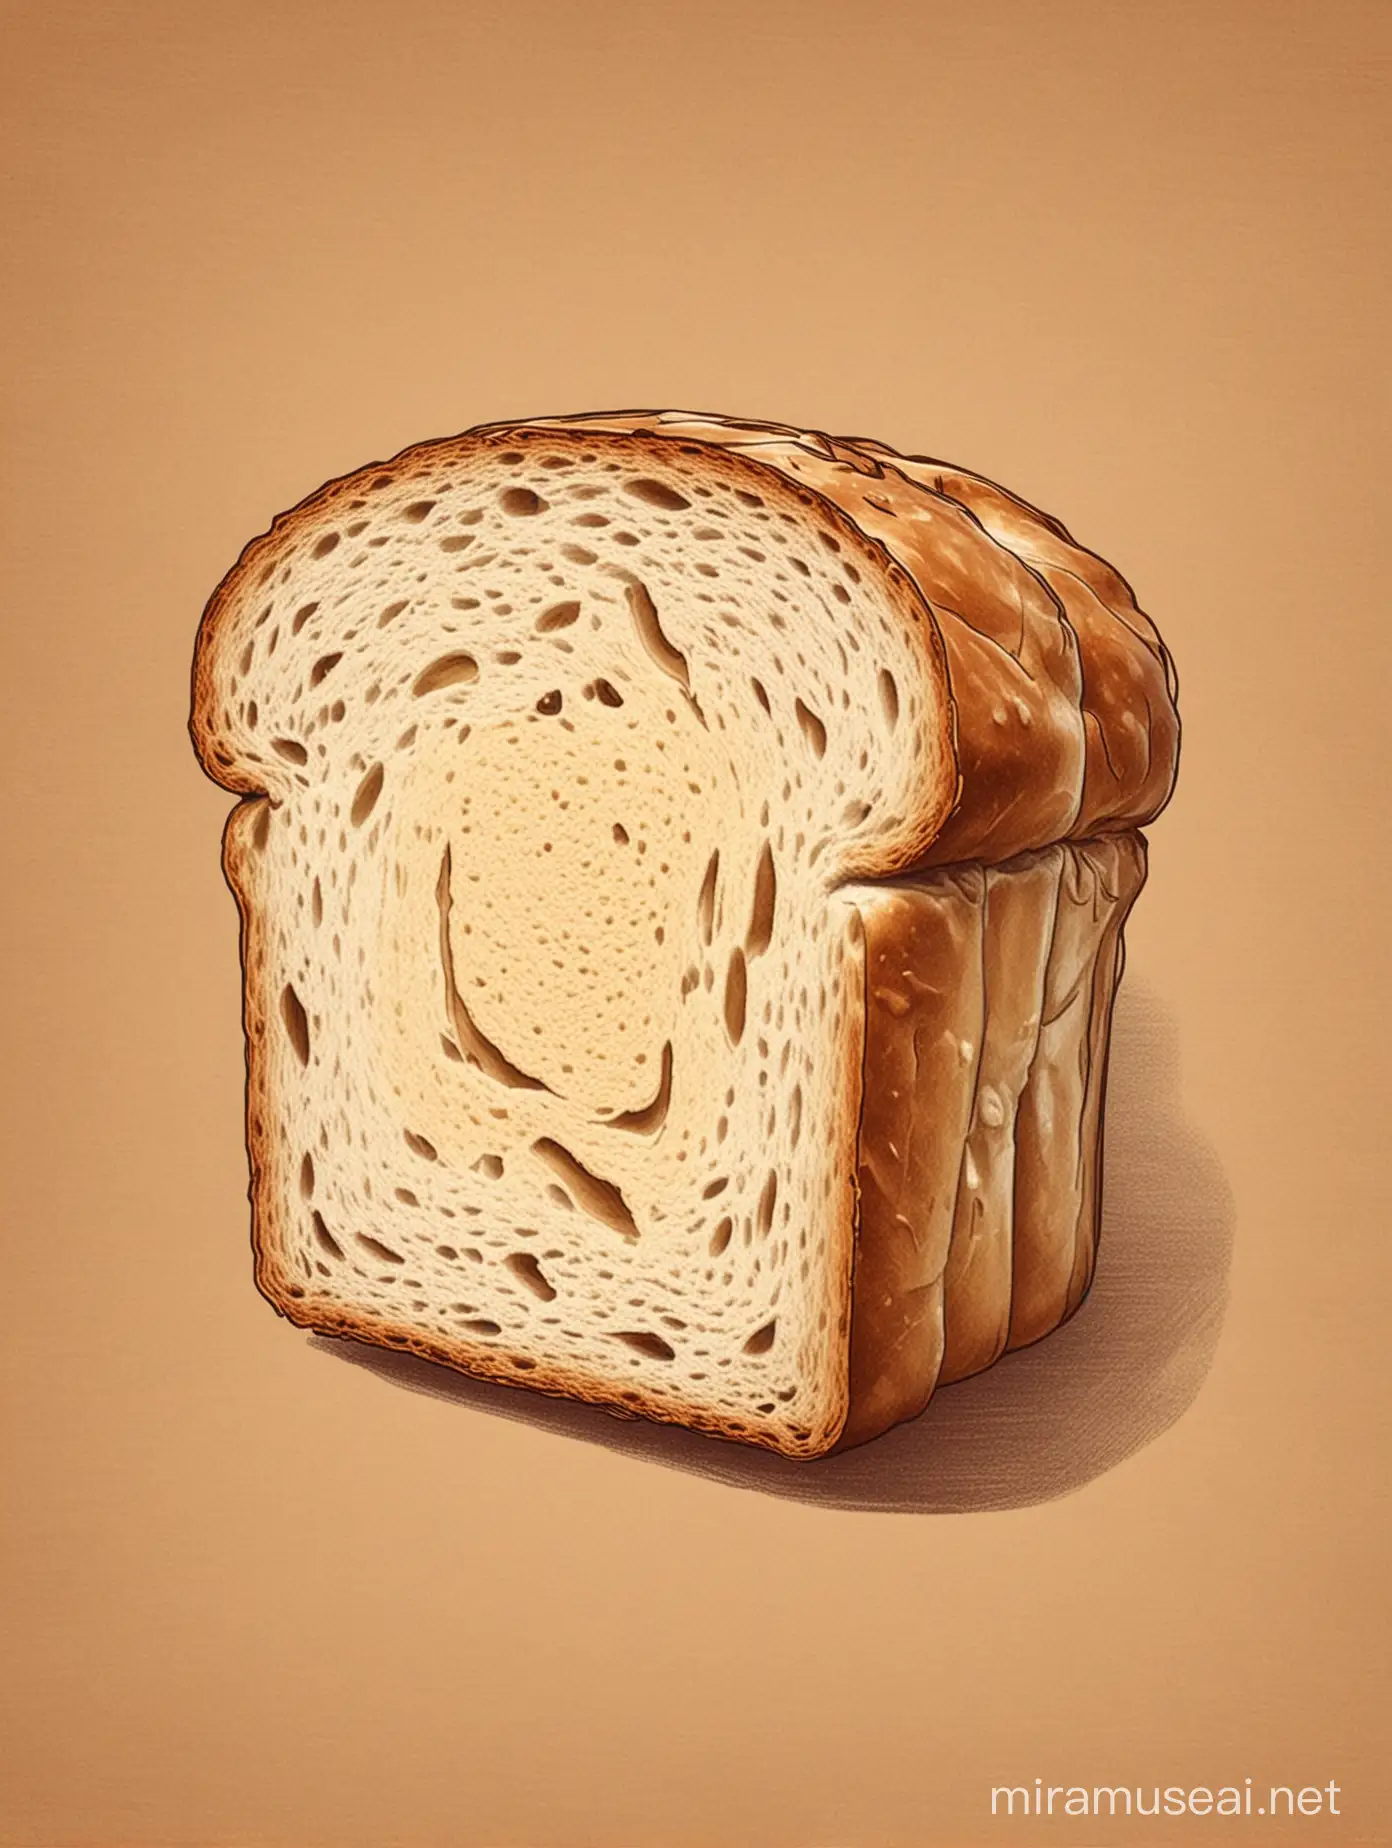 Sketch Style Slided Bread Sandwich on Brown Background